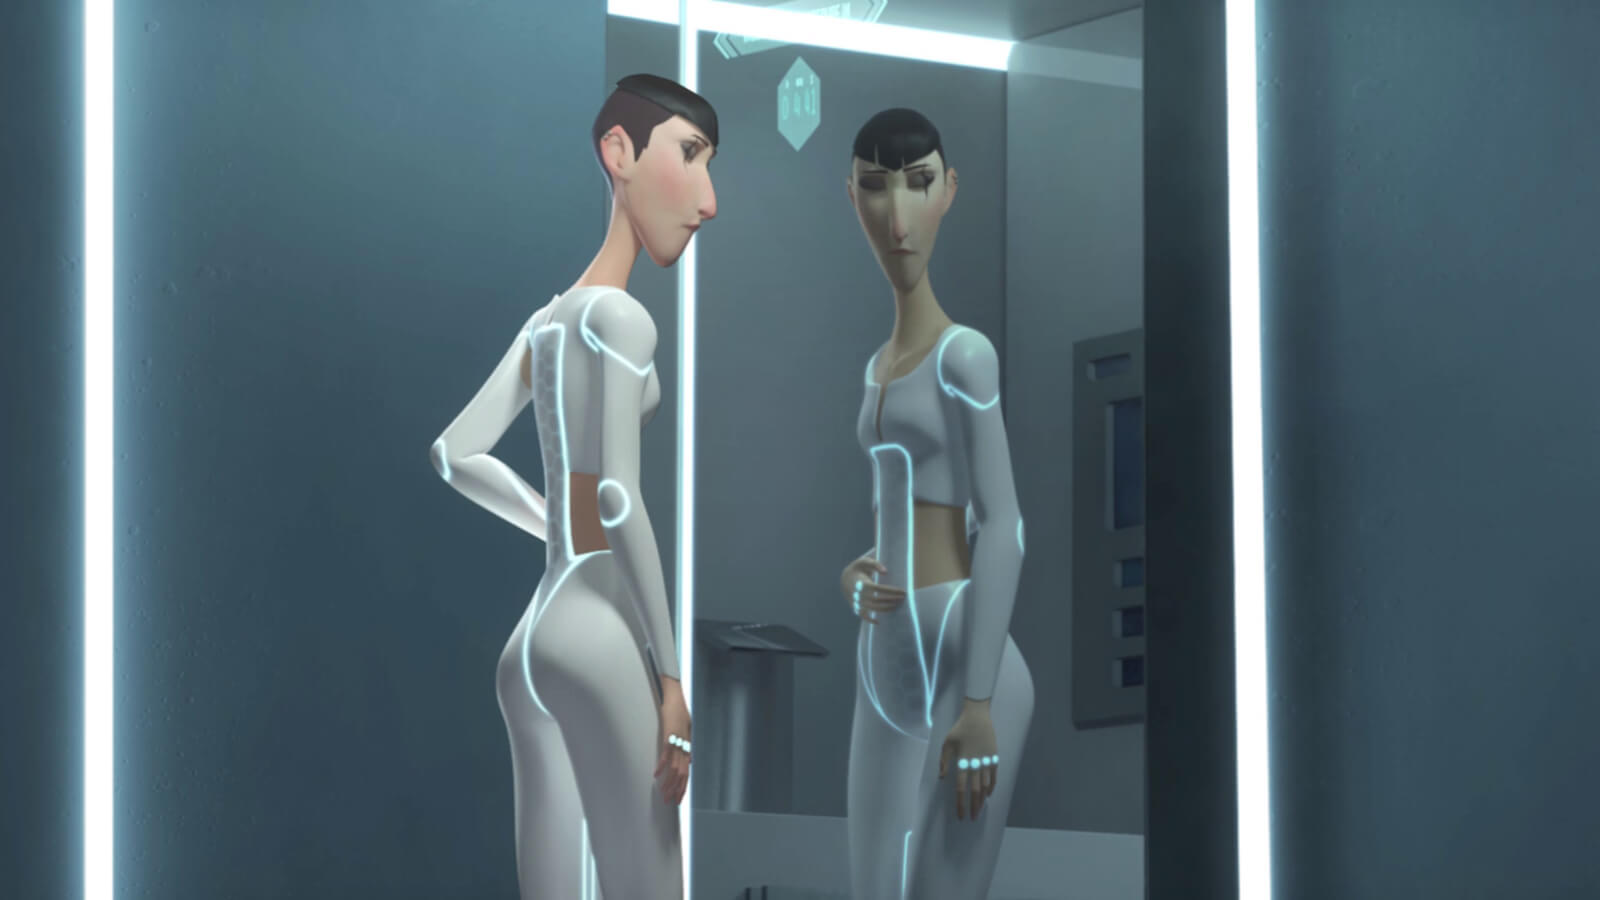 A tall, thin woman with a scar over her eye with futuristic white clothing looks into a mirror holding her stomach